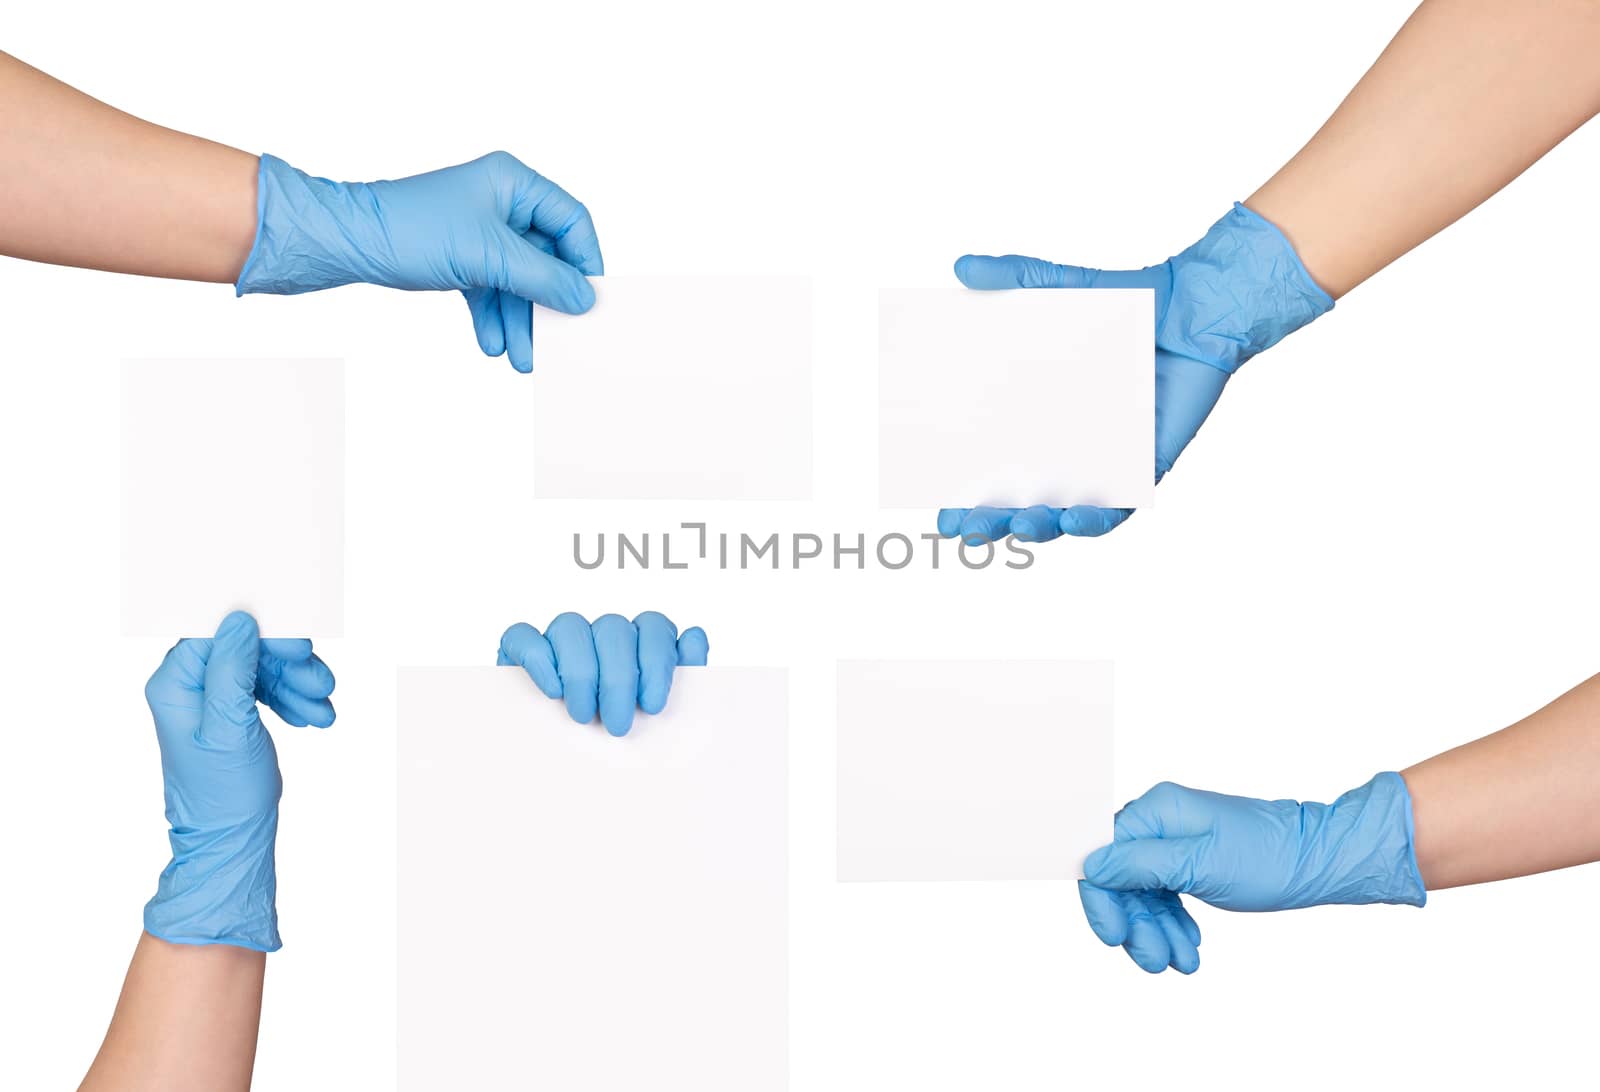 Pieces of blank paper in hands in medical gloves by photka